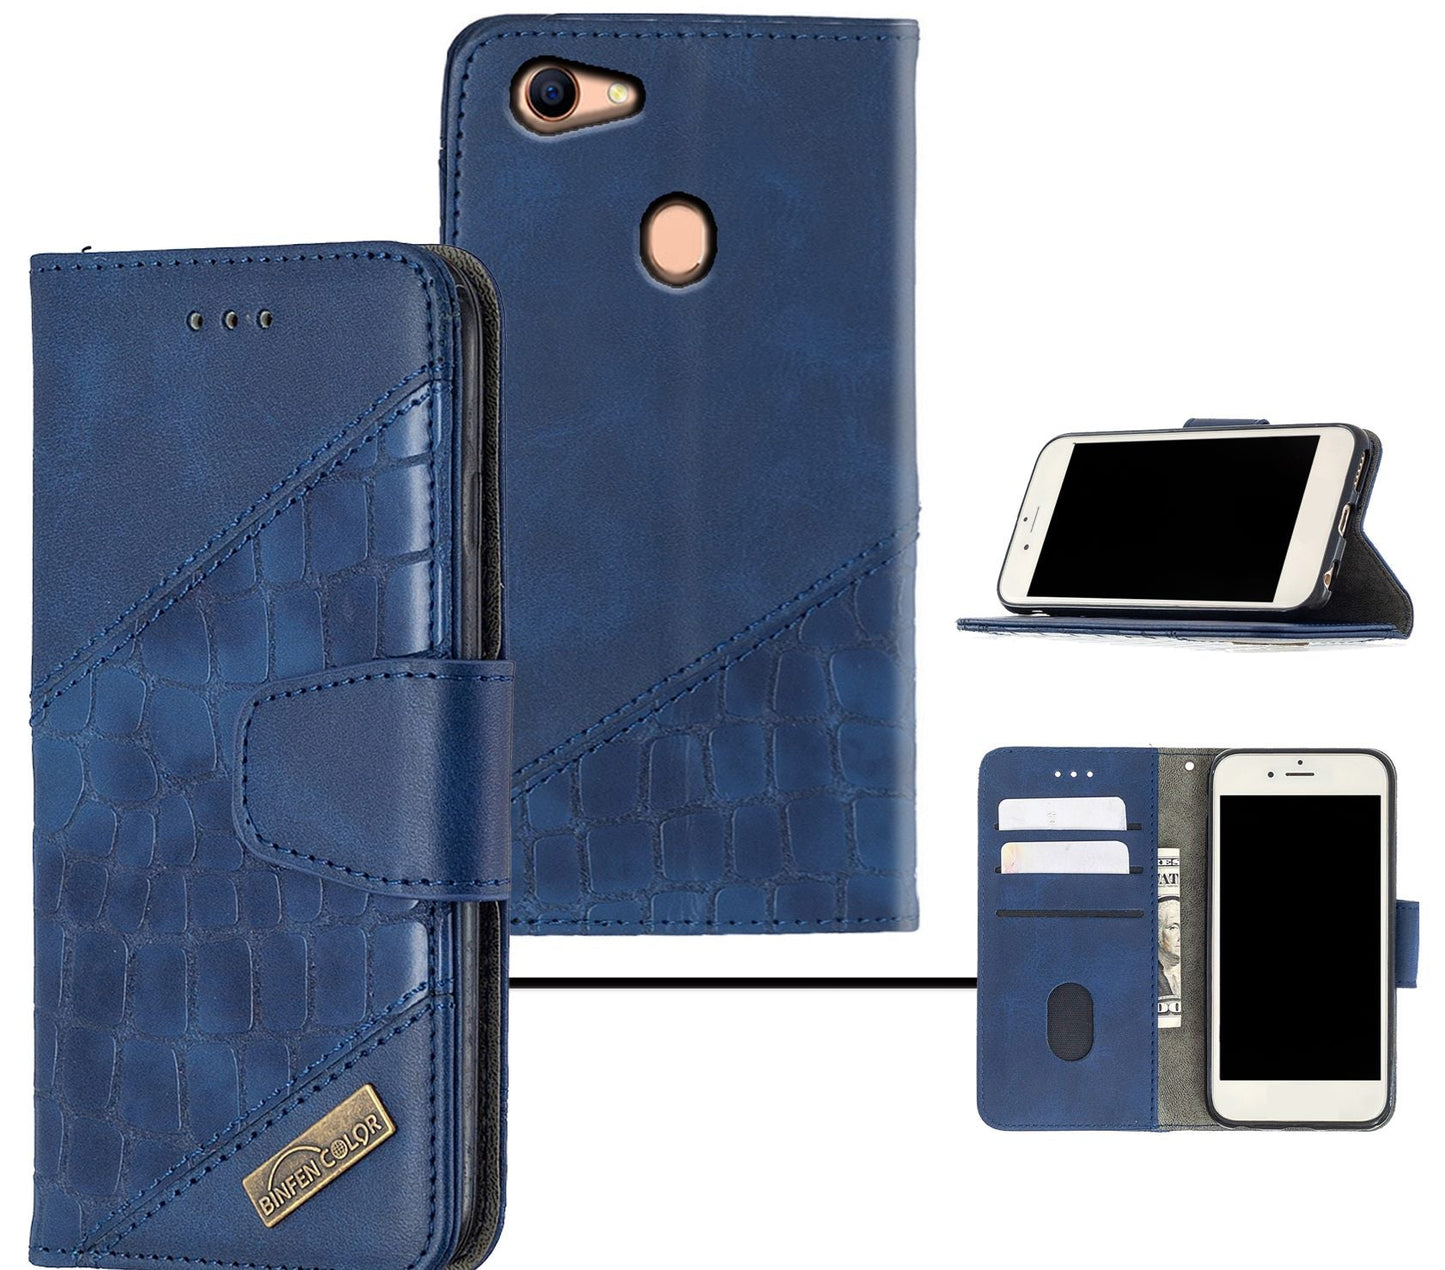 Oppo A73 Case Wallet Cover Blue